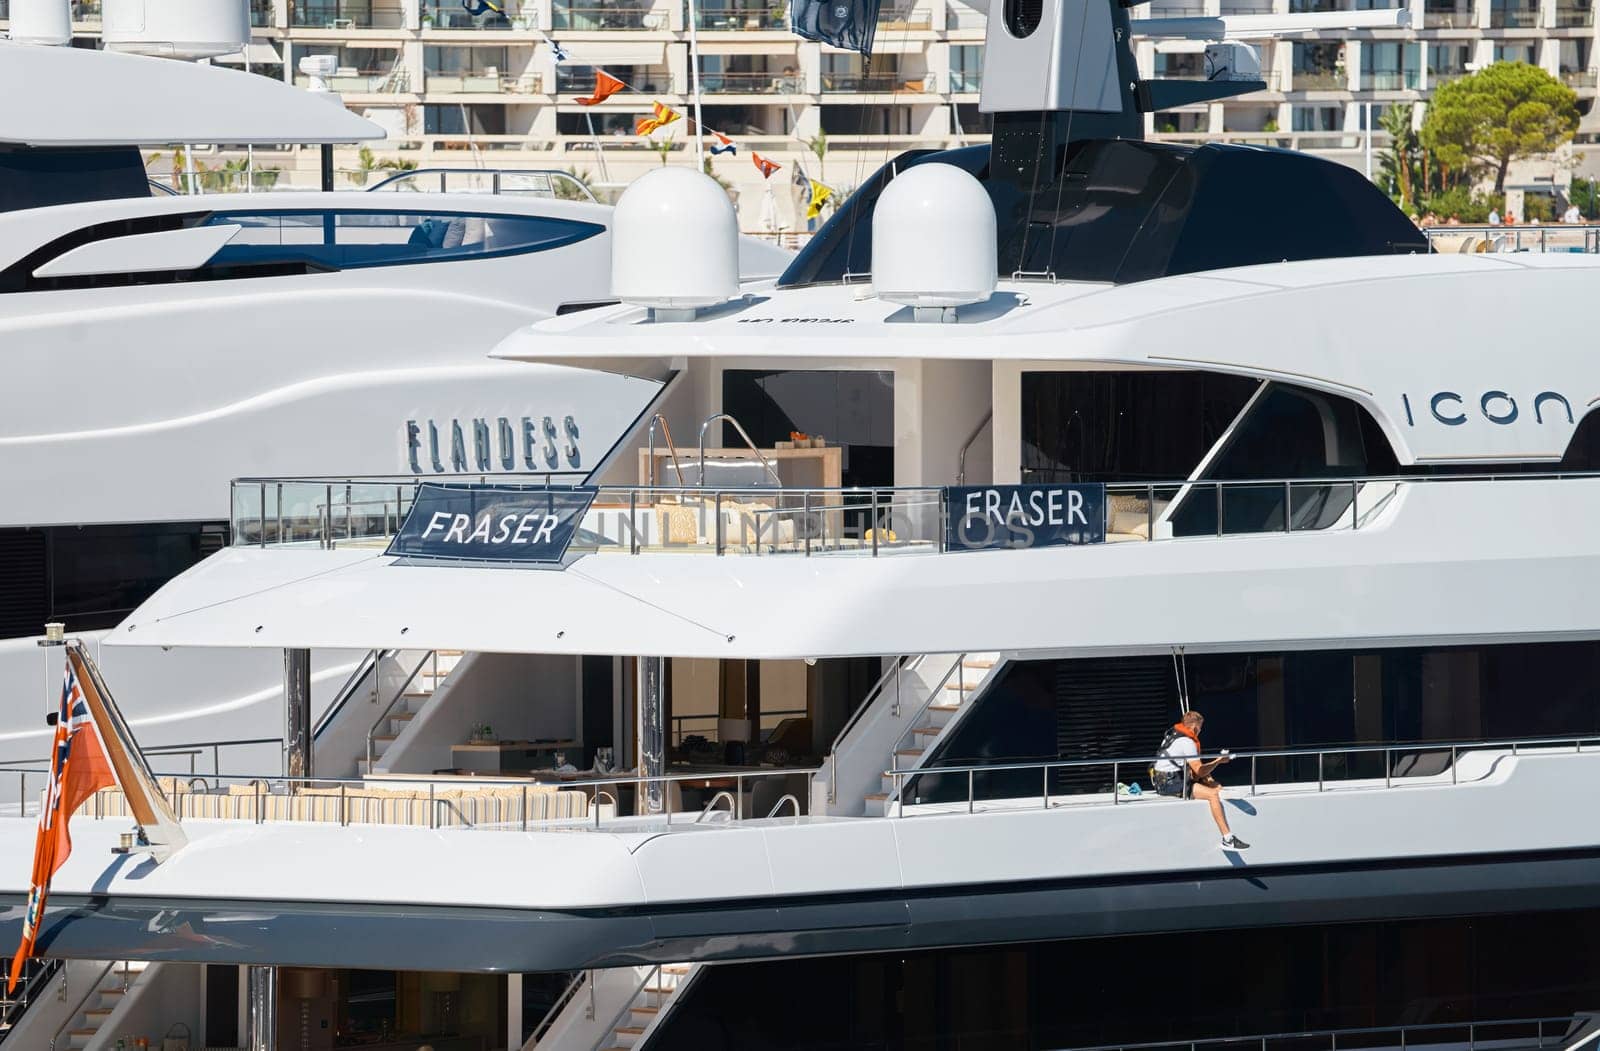 Monaco, Monte Carlo, 28 September 2022 - a member of the team washes the yacht and prepares the boat for the reception of guests at the famous motorboat exhibition in the principality, yacht brokers. High quality photo